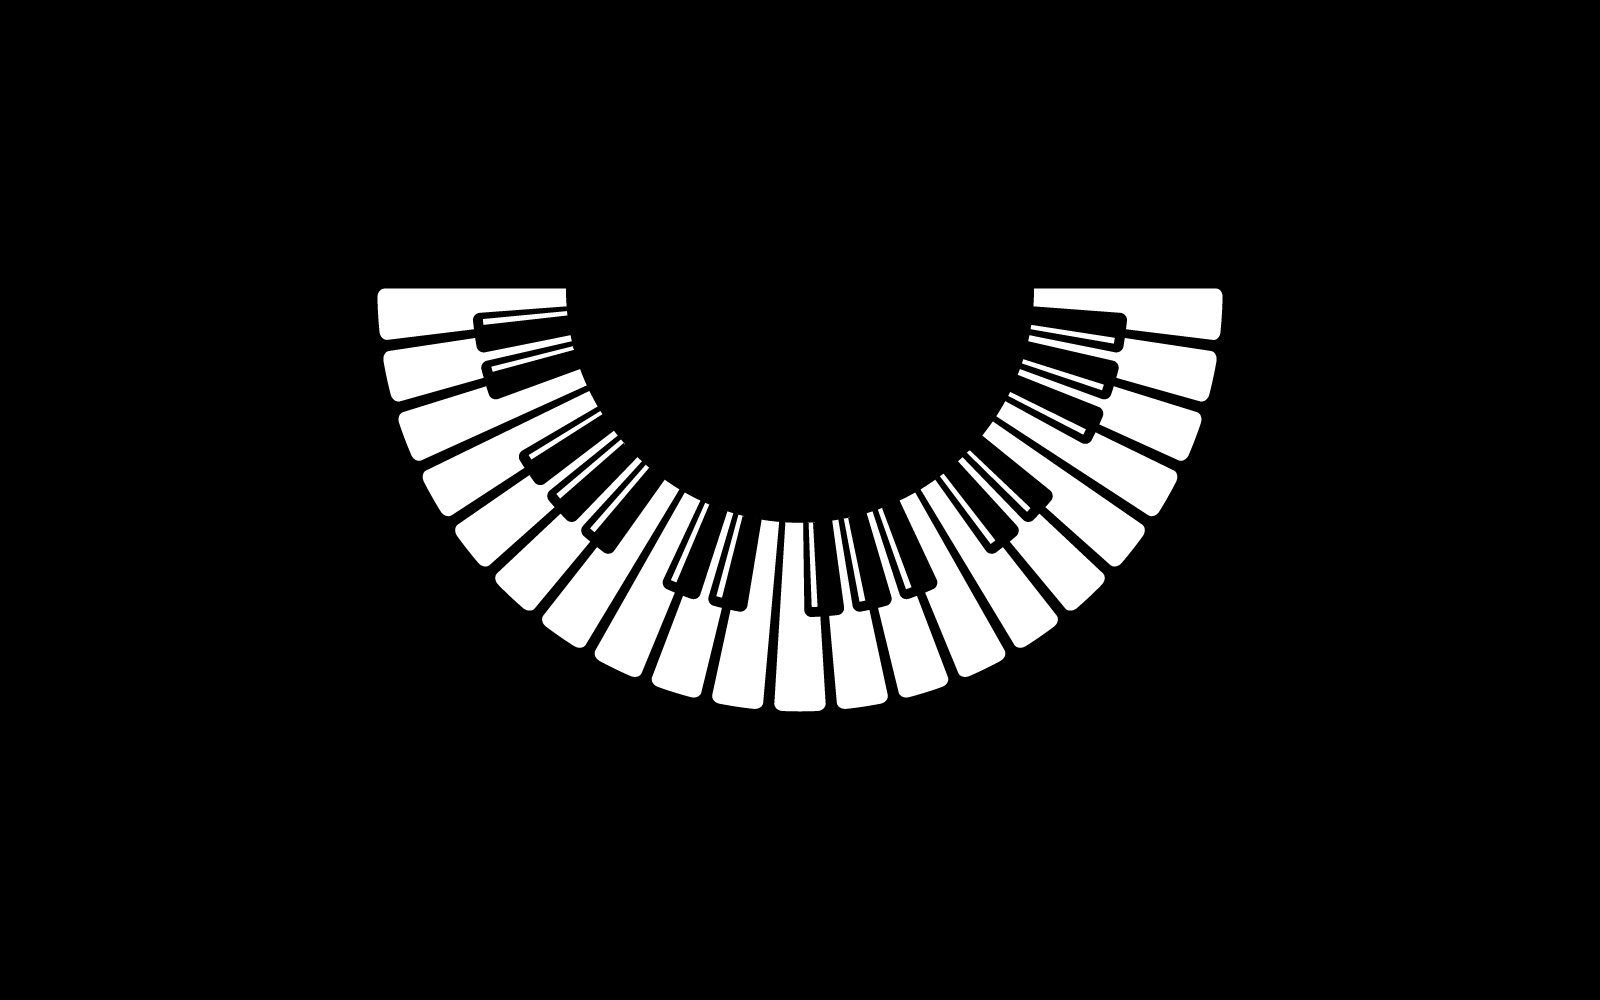 Piano on black background vector illustration flat design template Logo Template